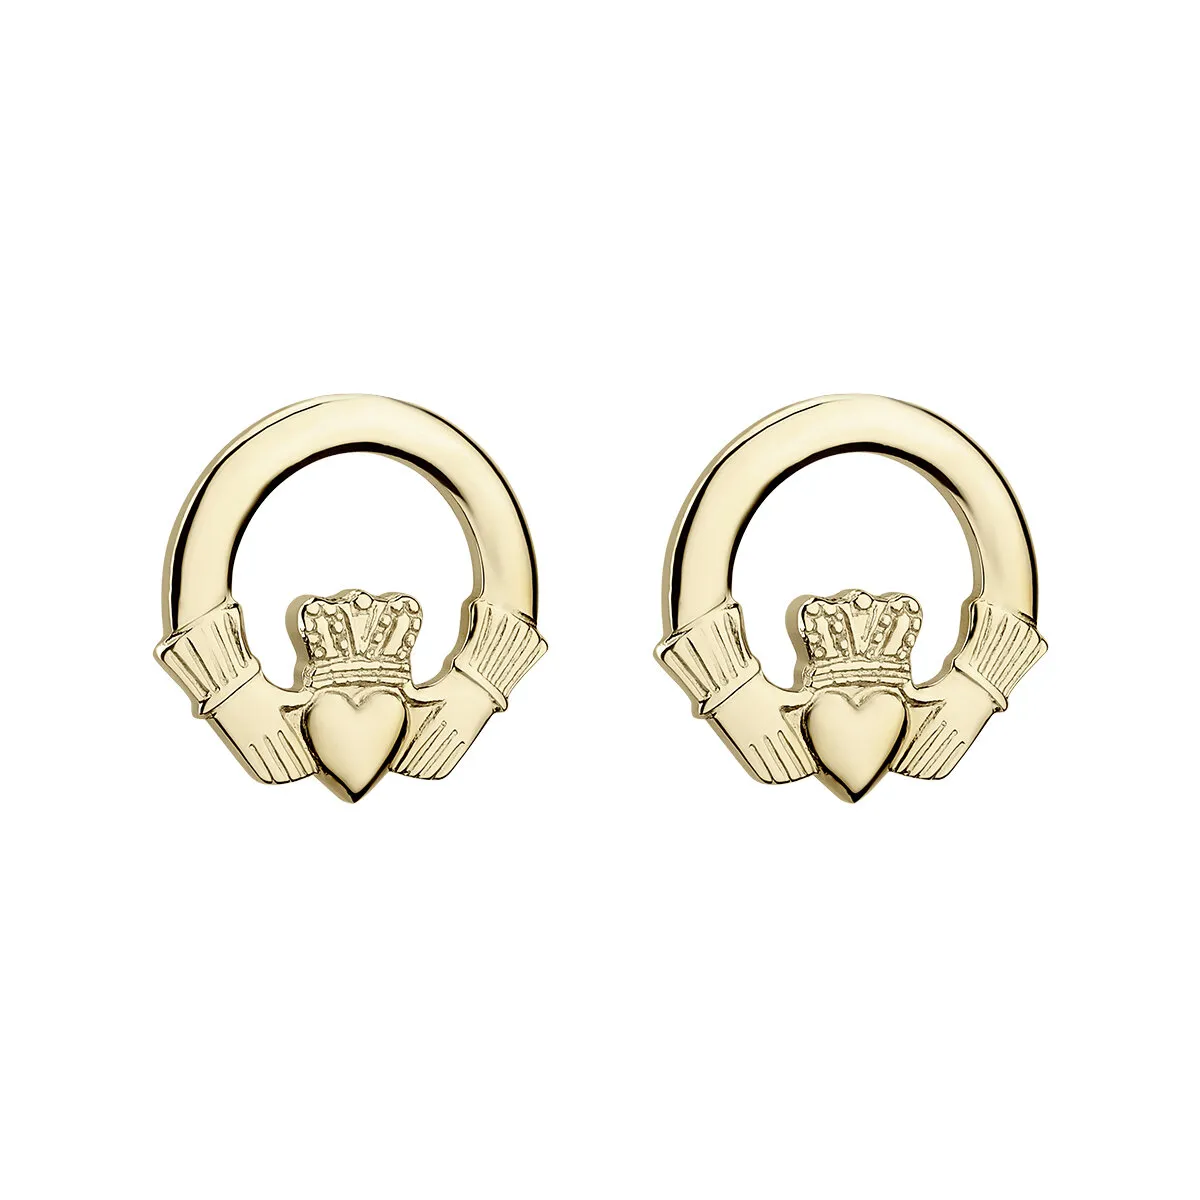 Traditional 14k Gold Claddagh Stud Earrings...